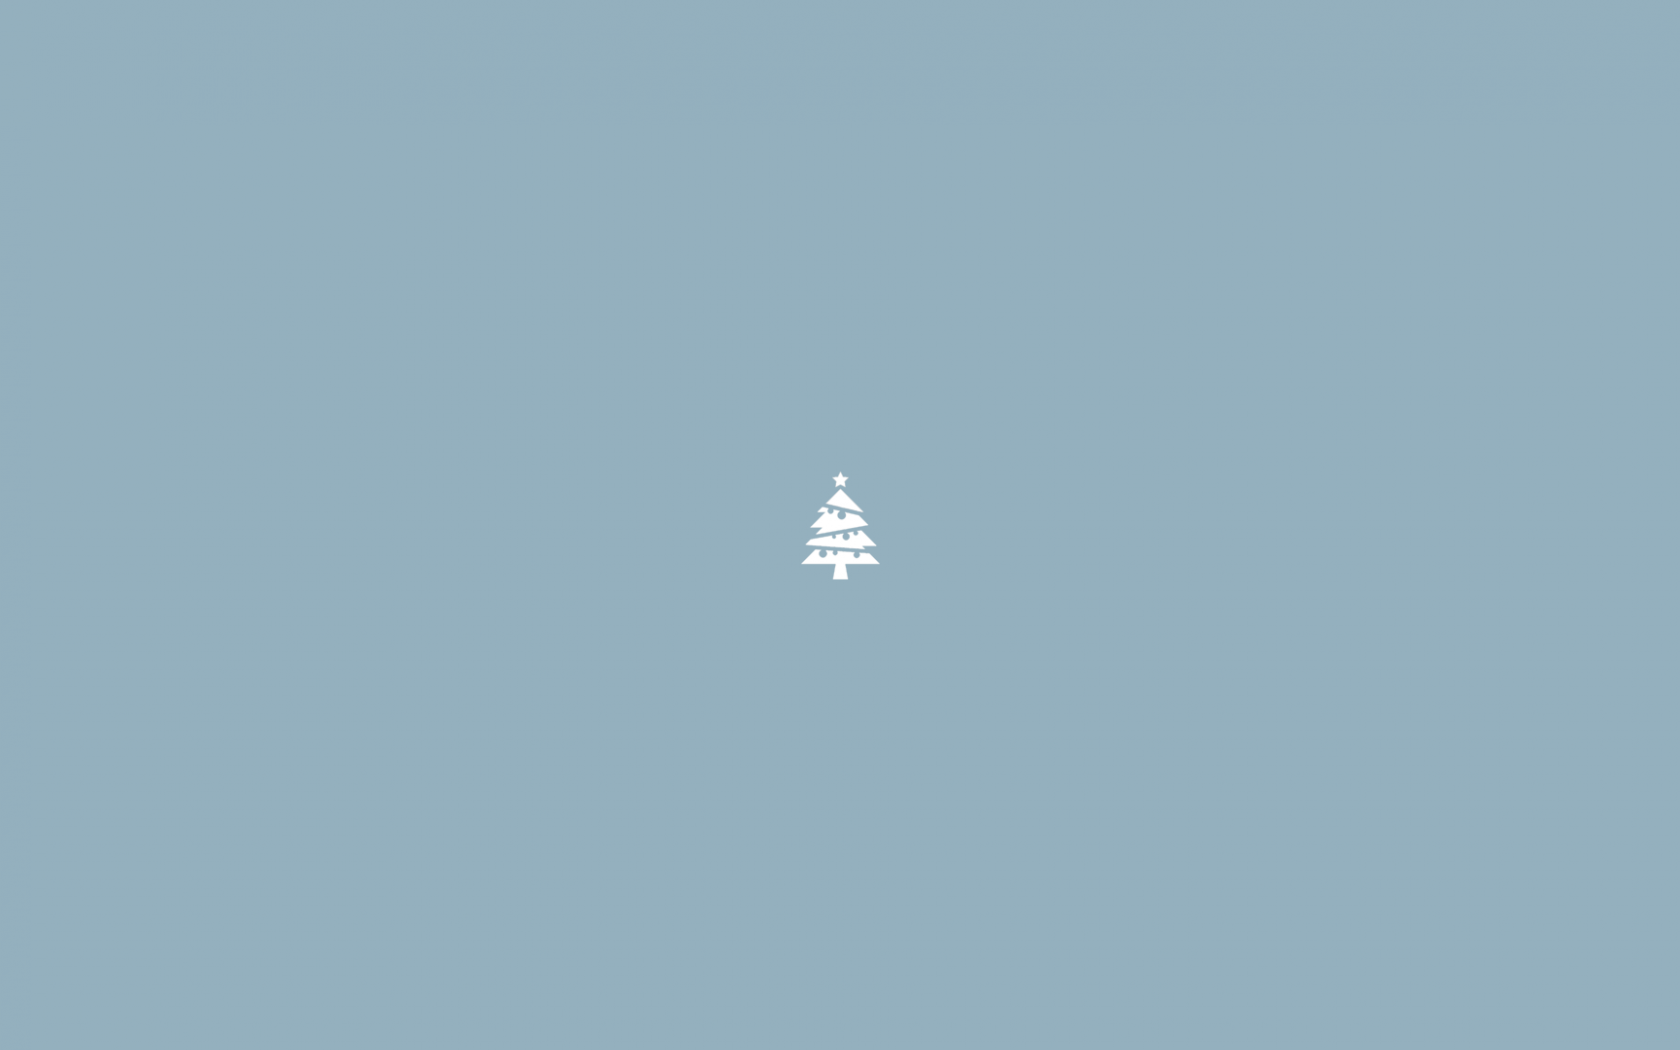 Free download Minimalist Christmas tree wallpaper [1920x1080] WALLPAPERS in [1920x1080] for your Desktop, Mobile & Tablet. Explore Christmas Tree Wallpaper Background. Tree Wallpaper for Walls, Free Tree Wallpaper, Palm